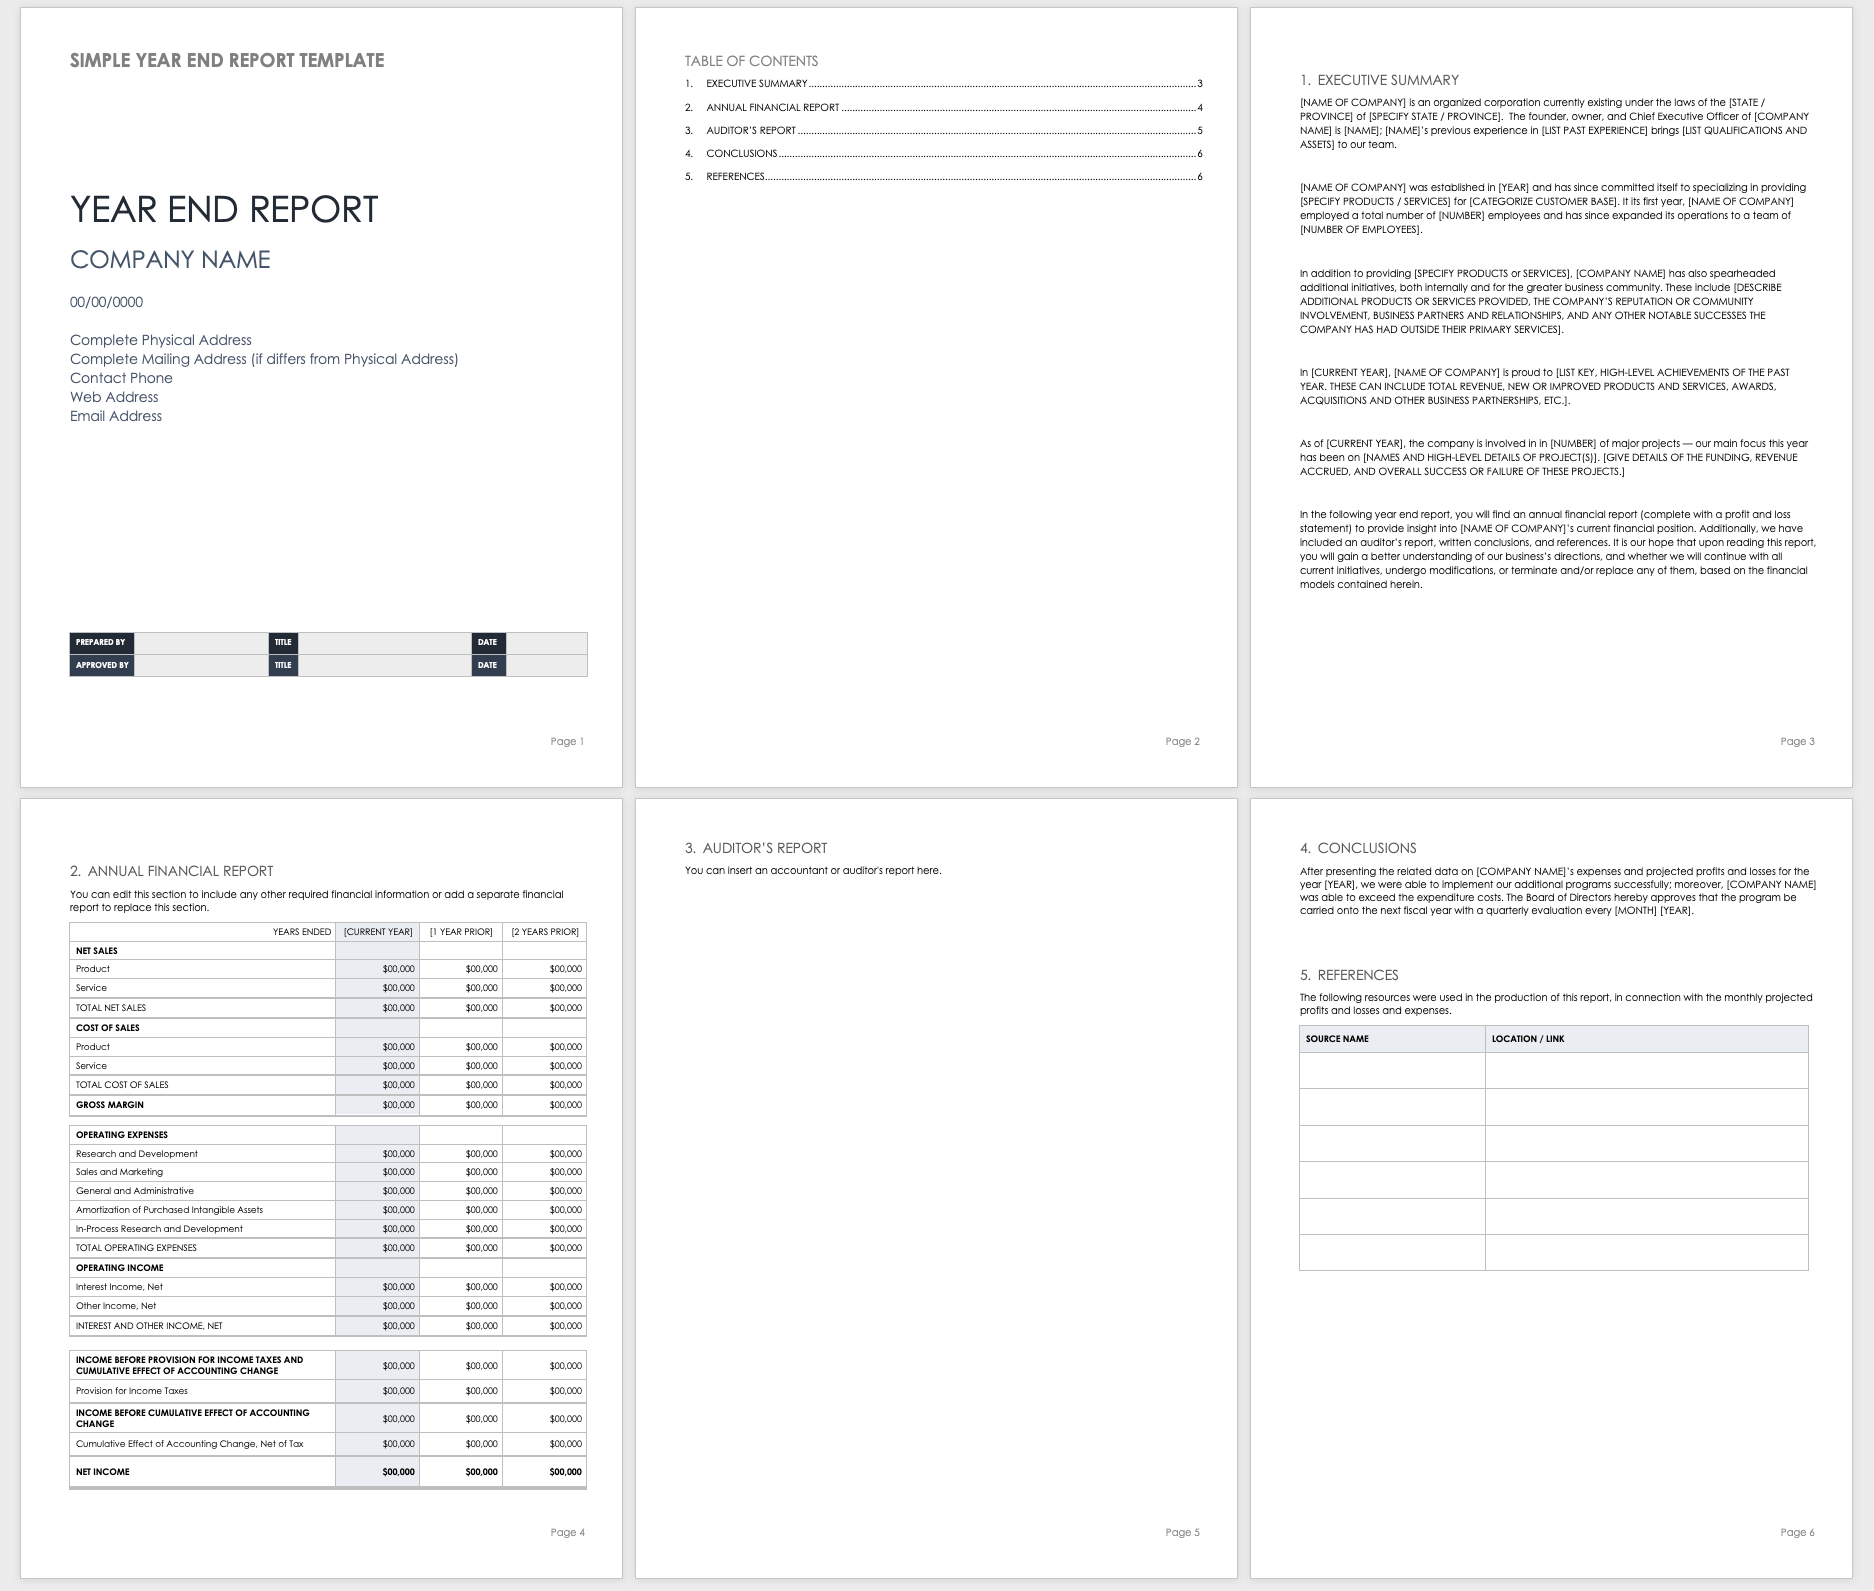 Free Year End Report Templates | Smartsheet With Regard To Annual Financial Report Template Word